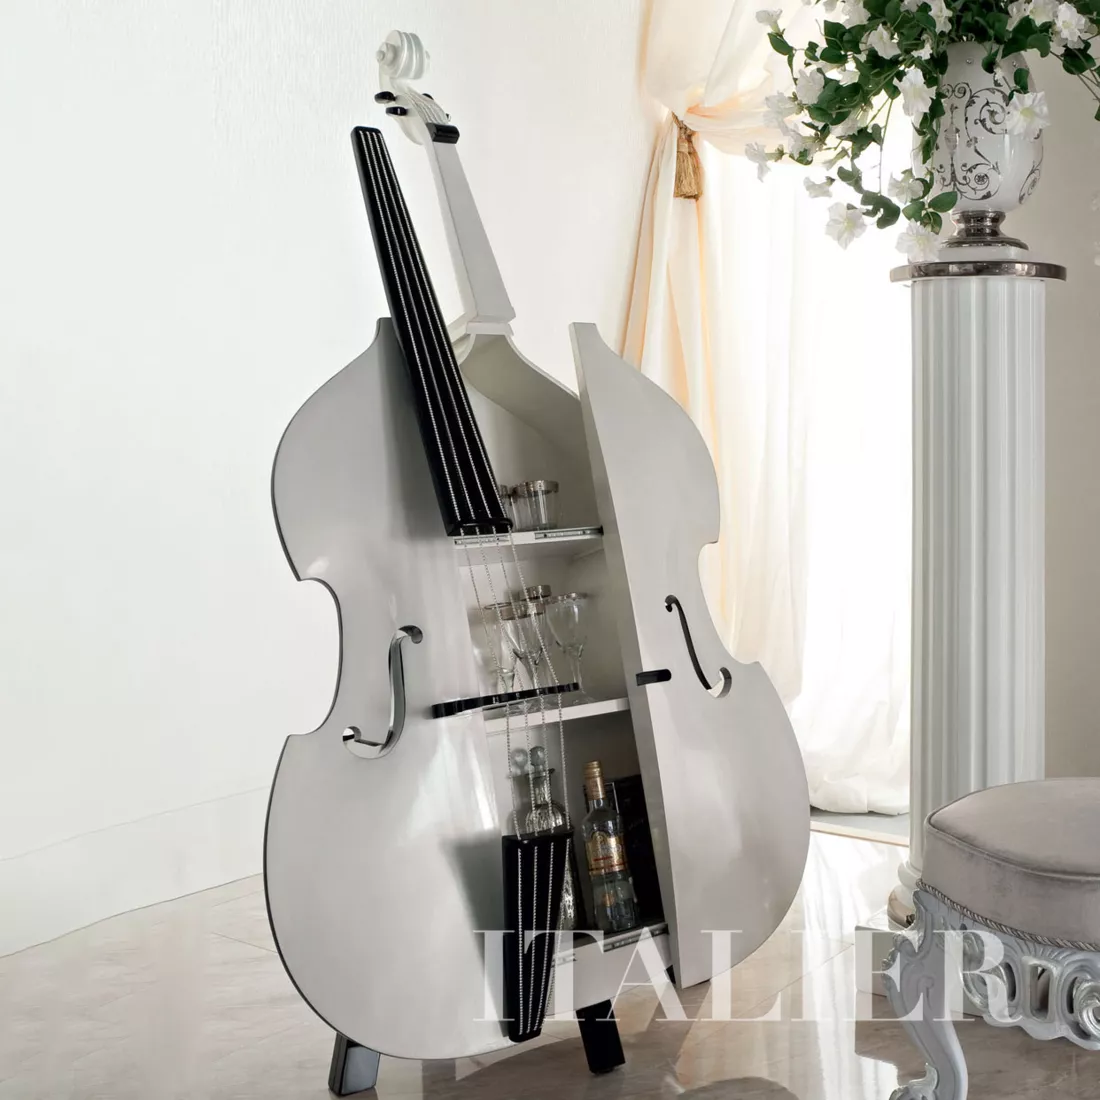 Double-bass-bar-hardwood-hanmade-in-Italy-with-pouf-Bella-Vita-collection-Modenese-Gastonekzfjtrgře